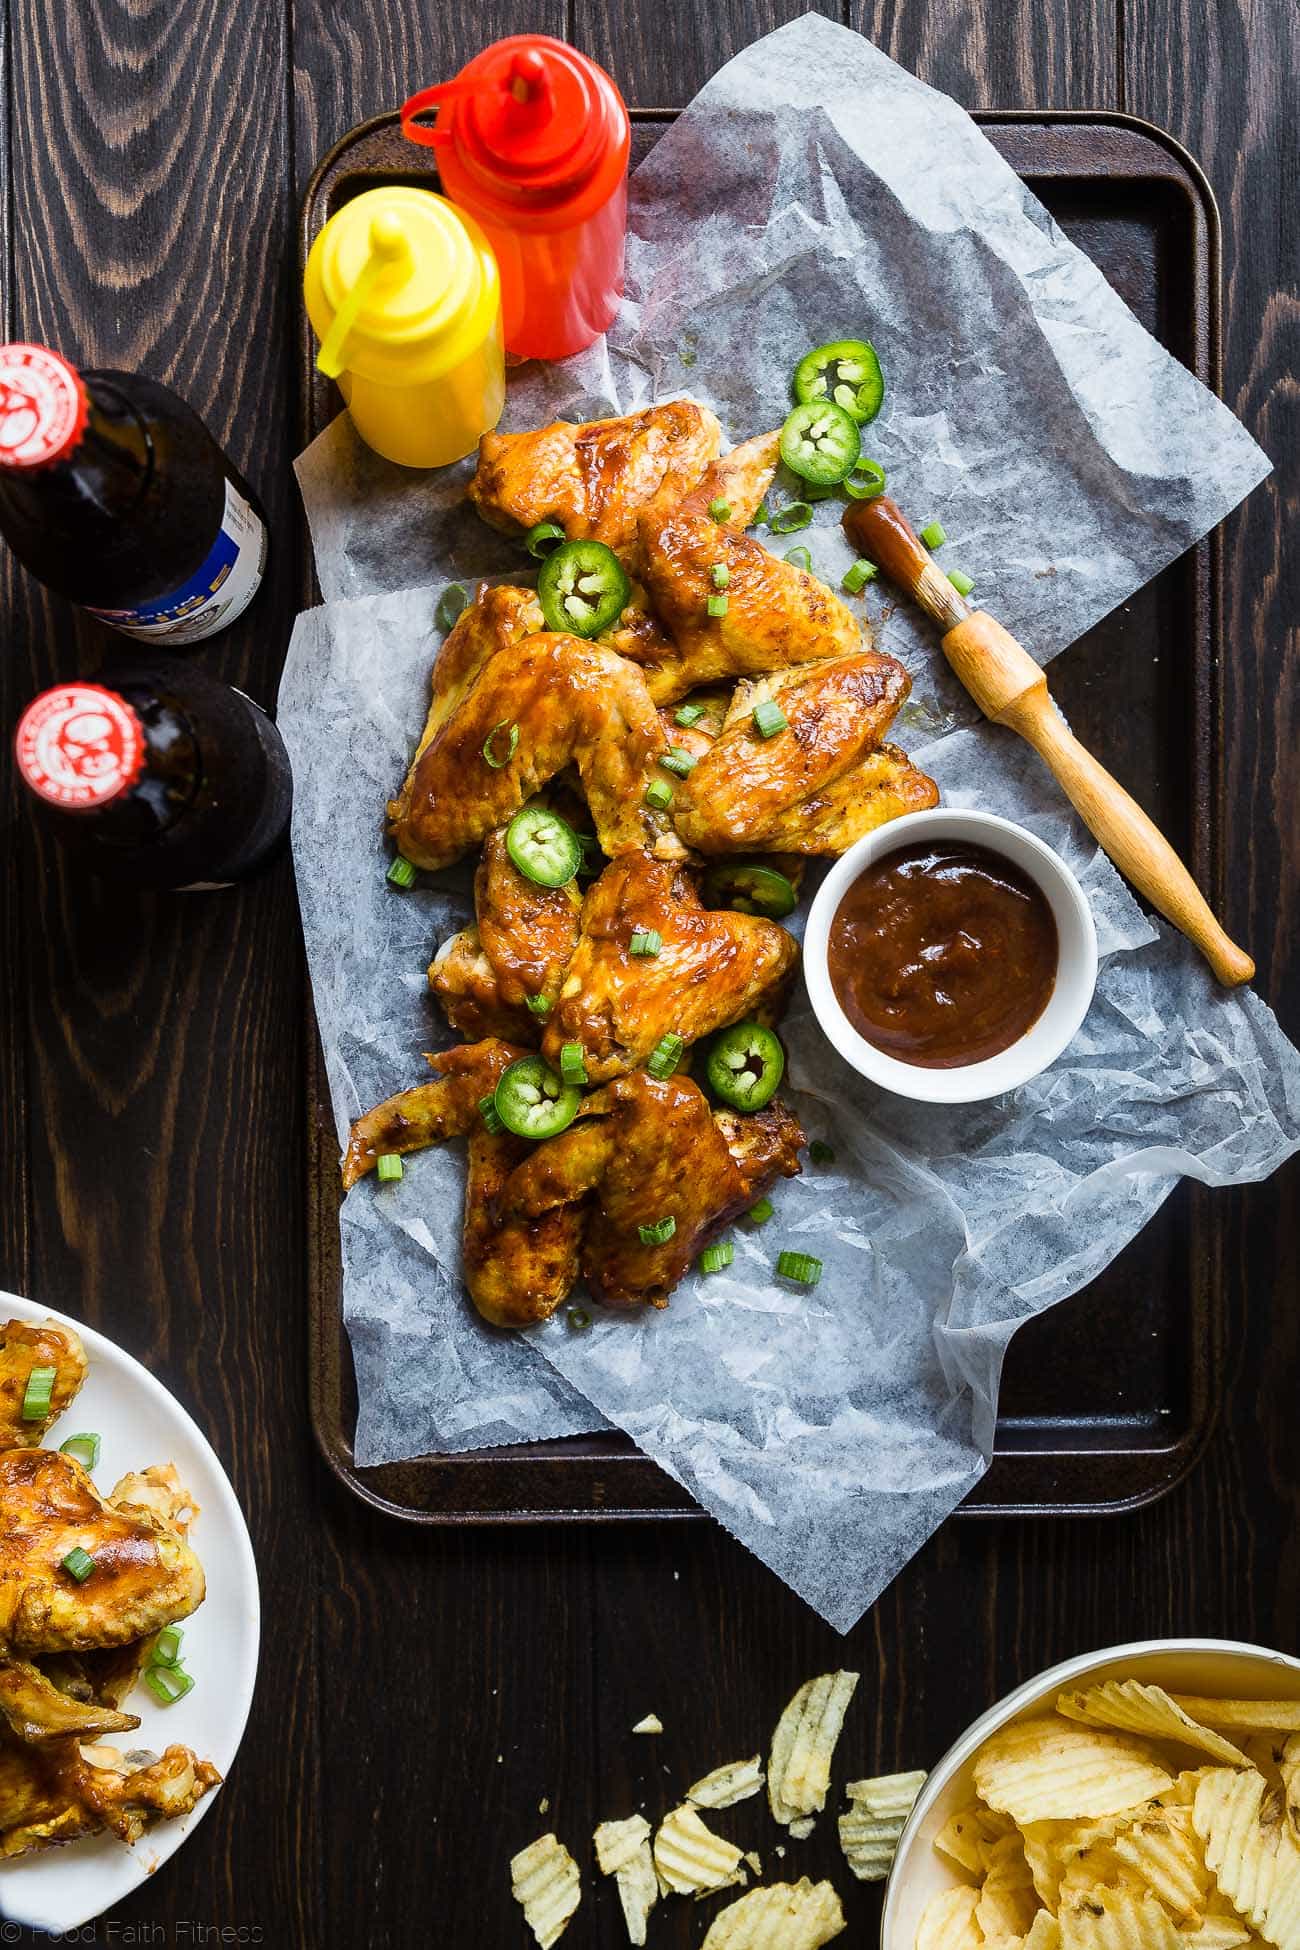 Slow Cooker BBQ Chicken Wings - Let the slow cooker do the work for you with these easy paleo-friendly chicken wings! A healthy, gluten, grain and dairy free, crowd pleasing appetizer for game day! | Foodfaithfitness.com | @FoodFaithFit